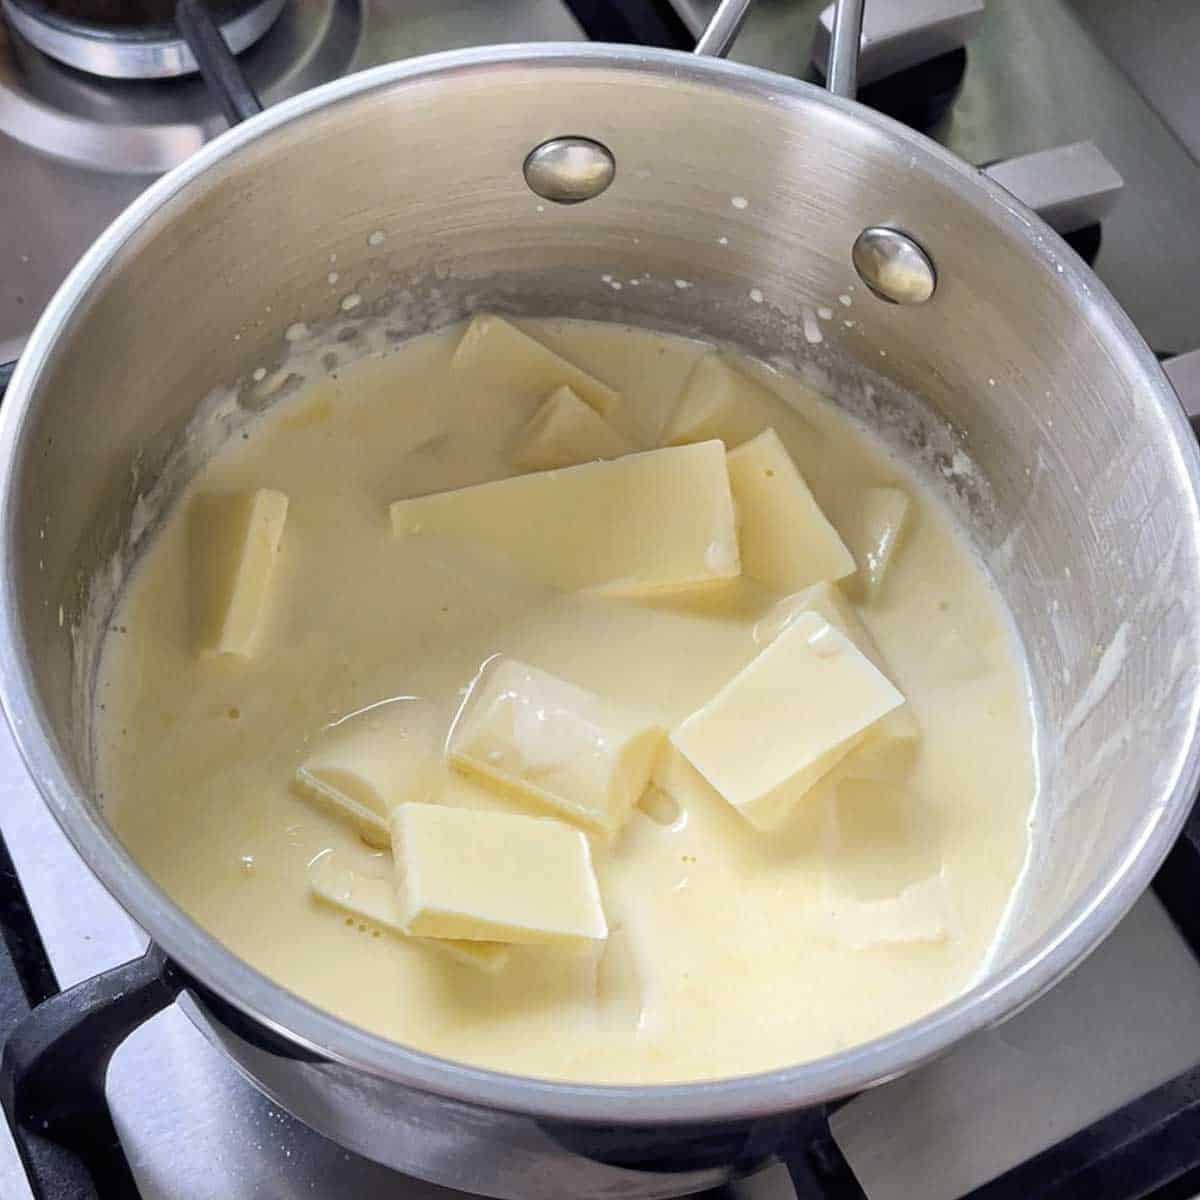 White chocolate melting in a saucepan.